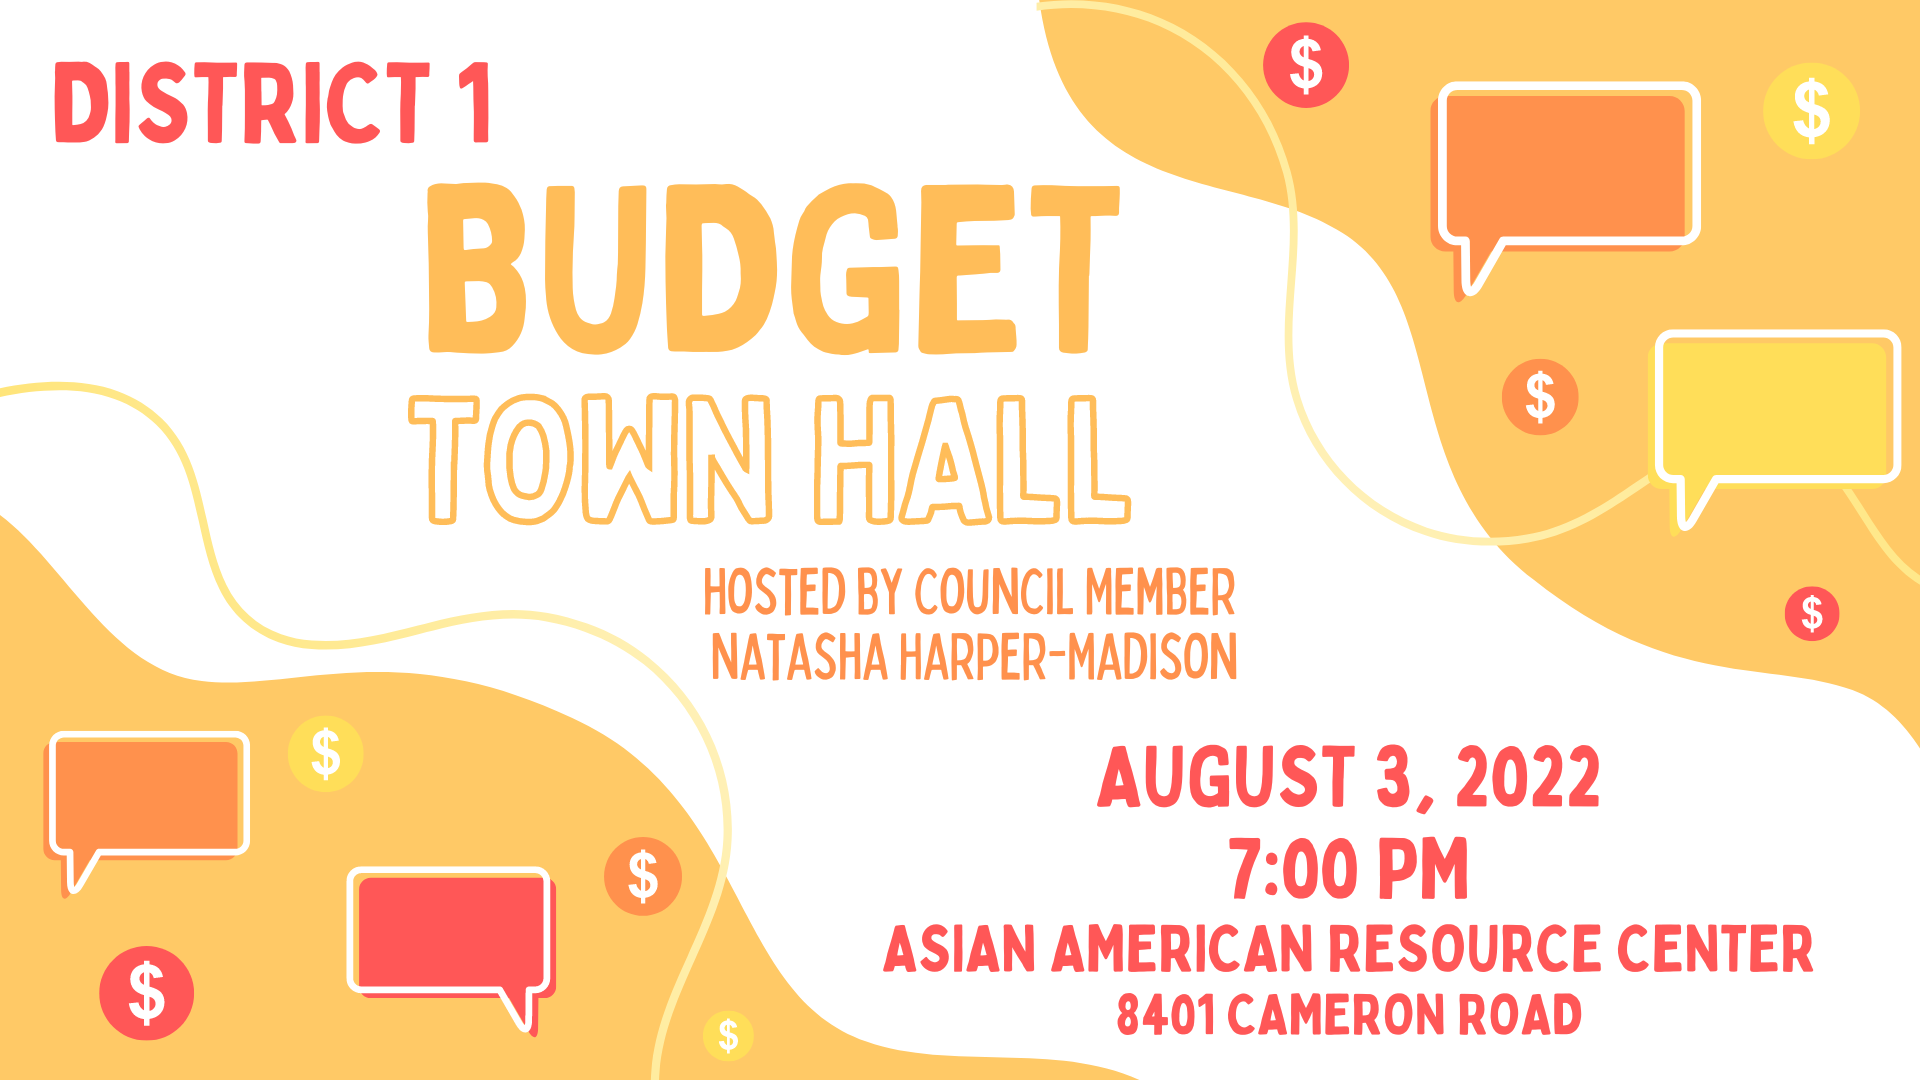 District 1 Budget Town Hall